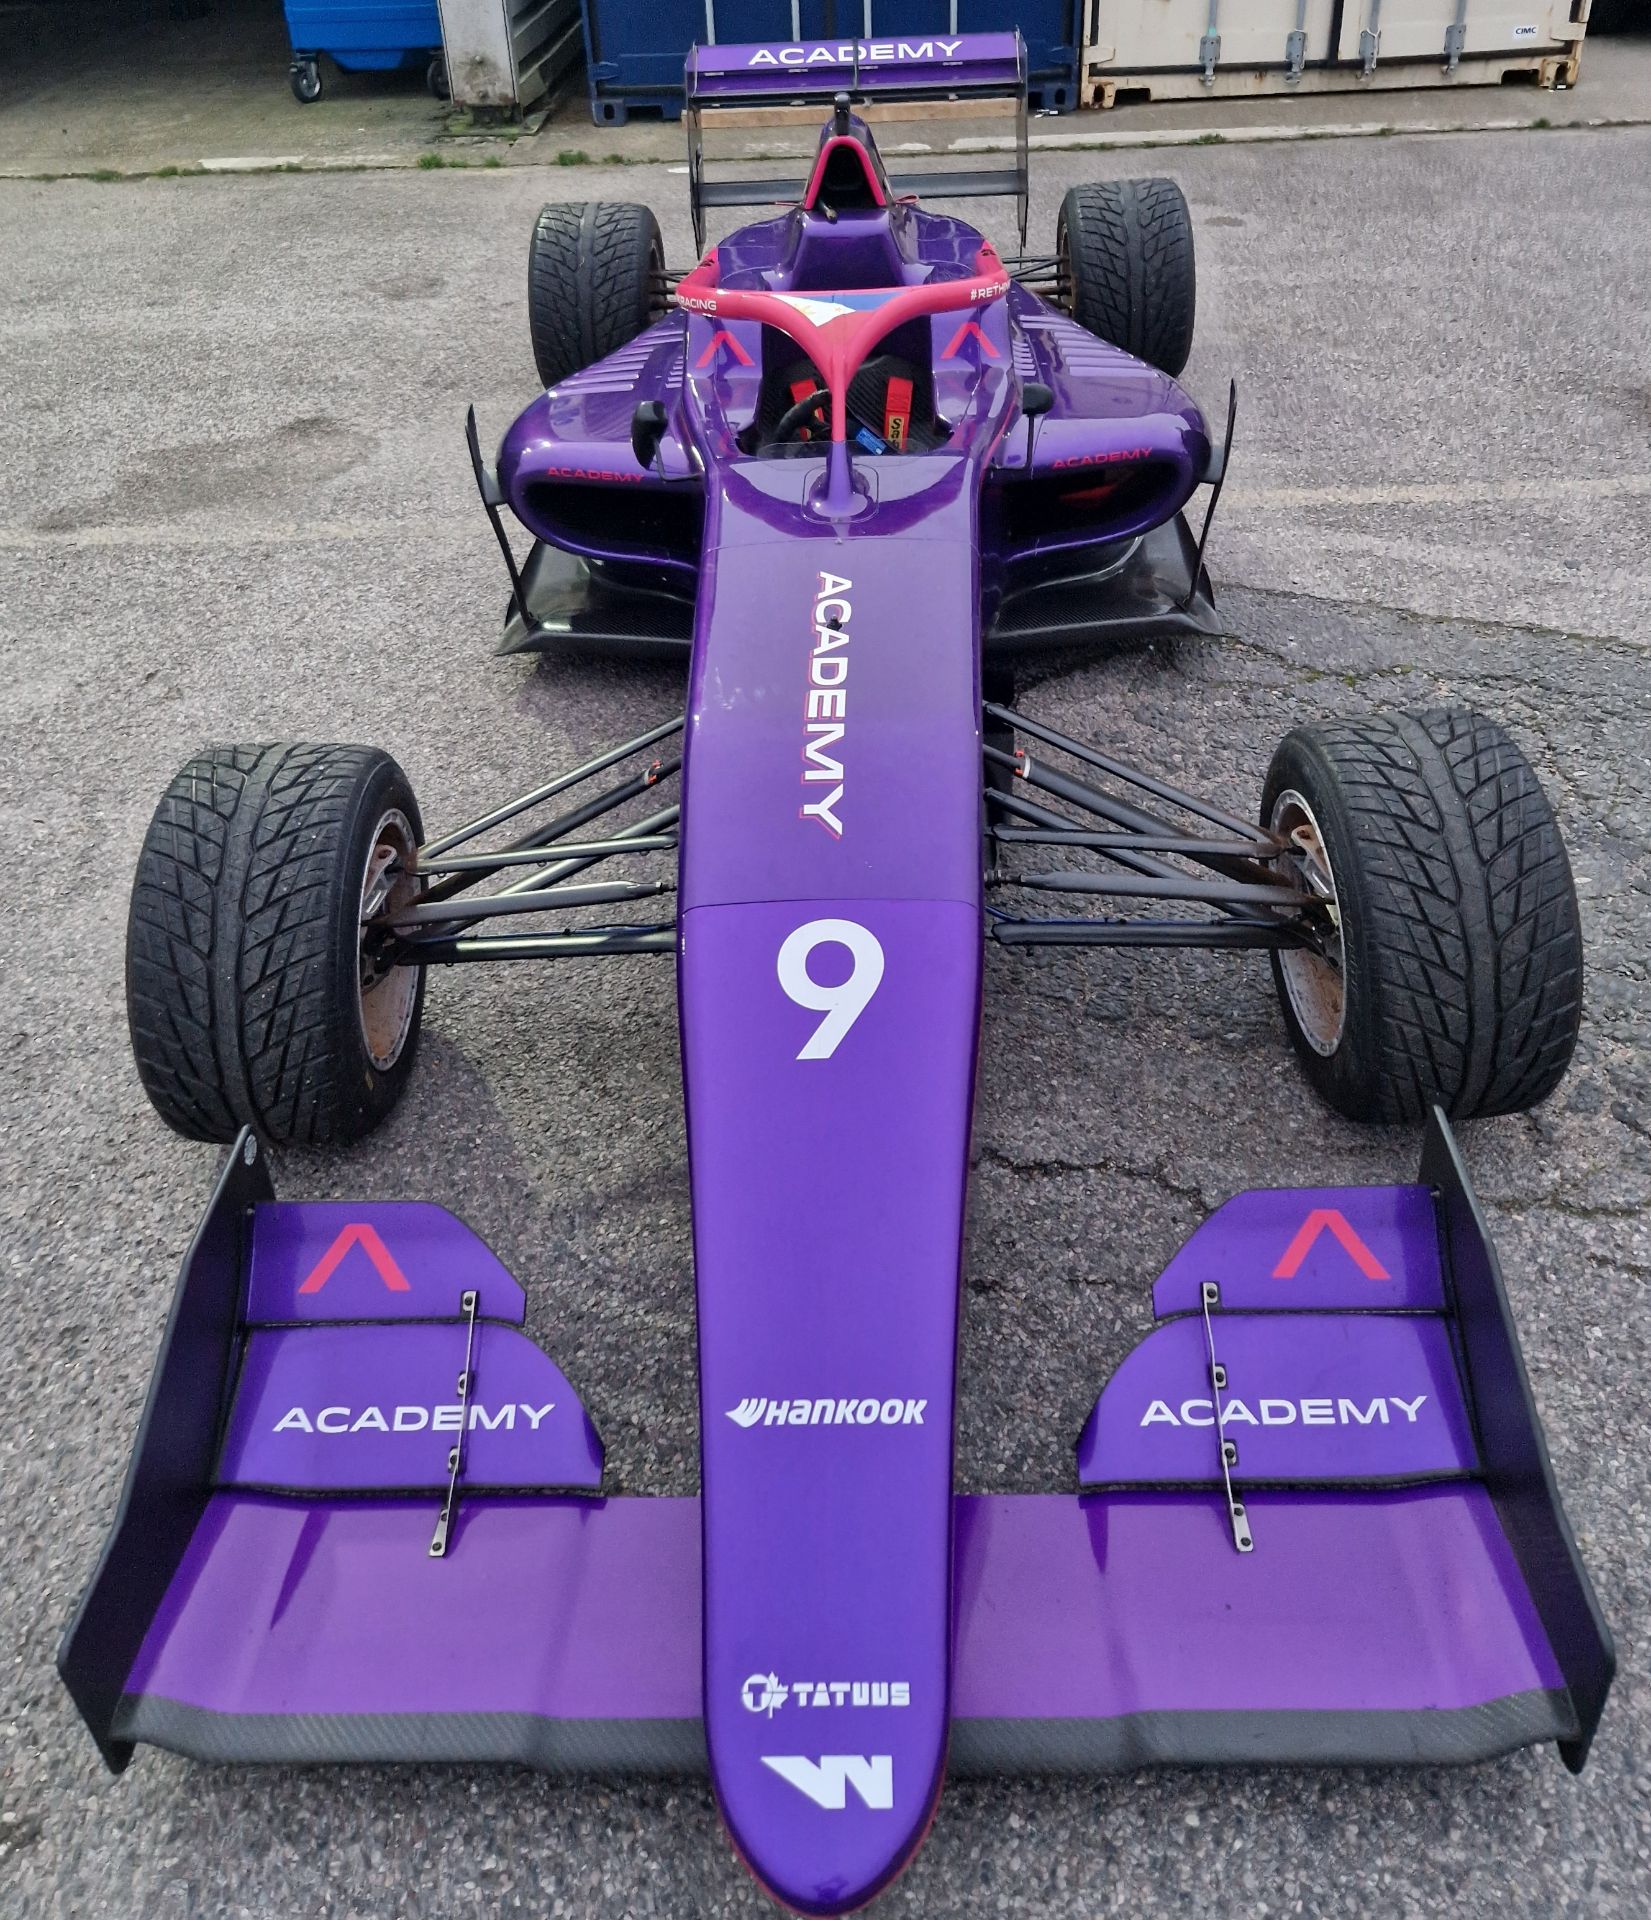 One TATUUS F3 T-318 Alfa Romeo Race Car Chassis No. 057 (2019) Finished in the W Series Academy - Image 3 of 10